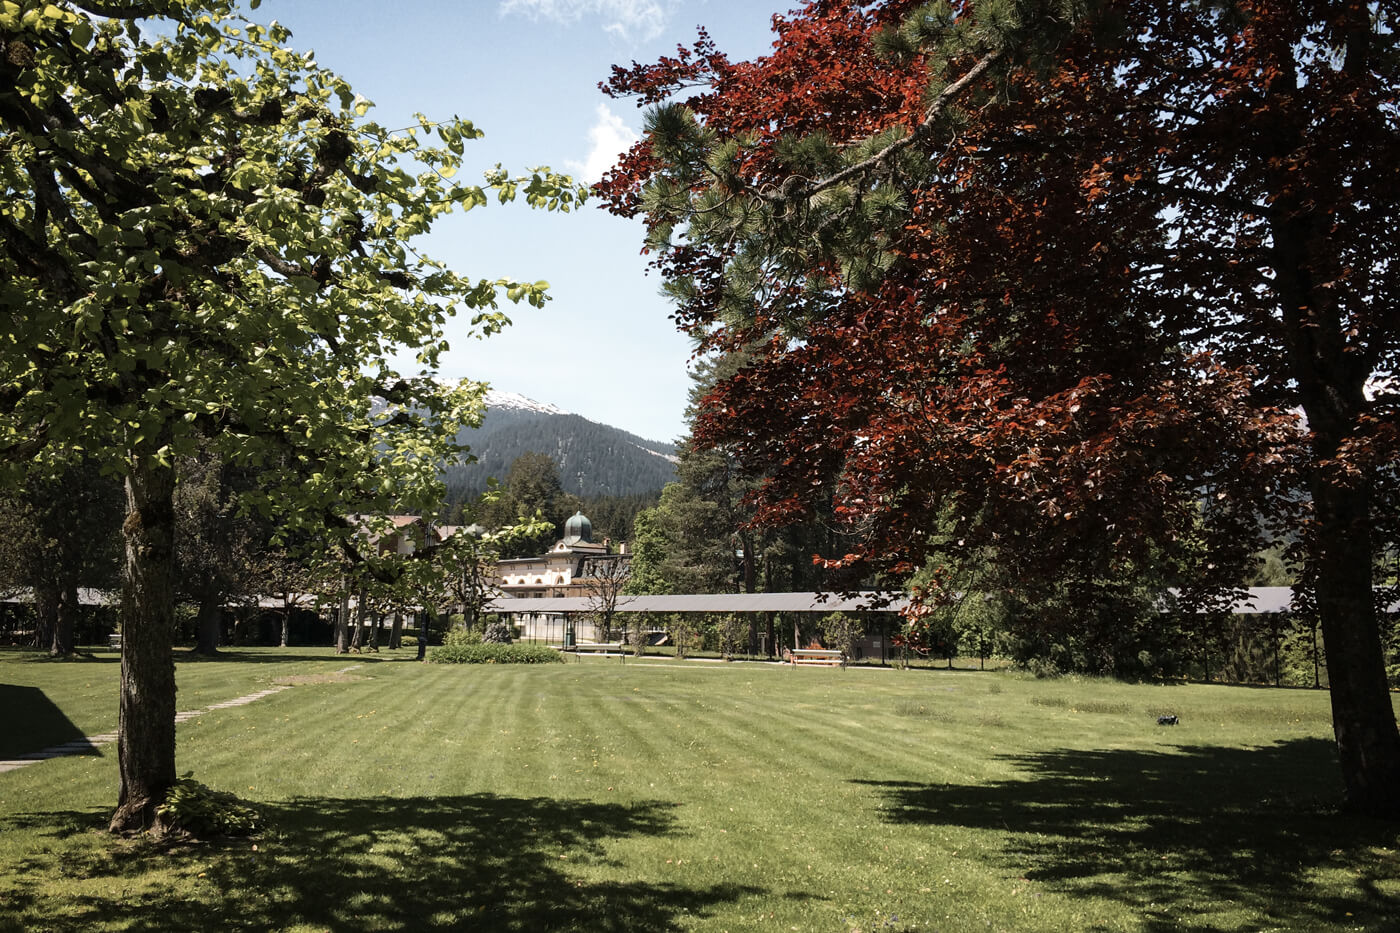 a landscape shot of the Waldhaus Flims resort building and the surrounding grounds. The building is white and is contrasted by the bright green of the evergreen trees that surround it.